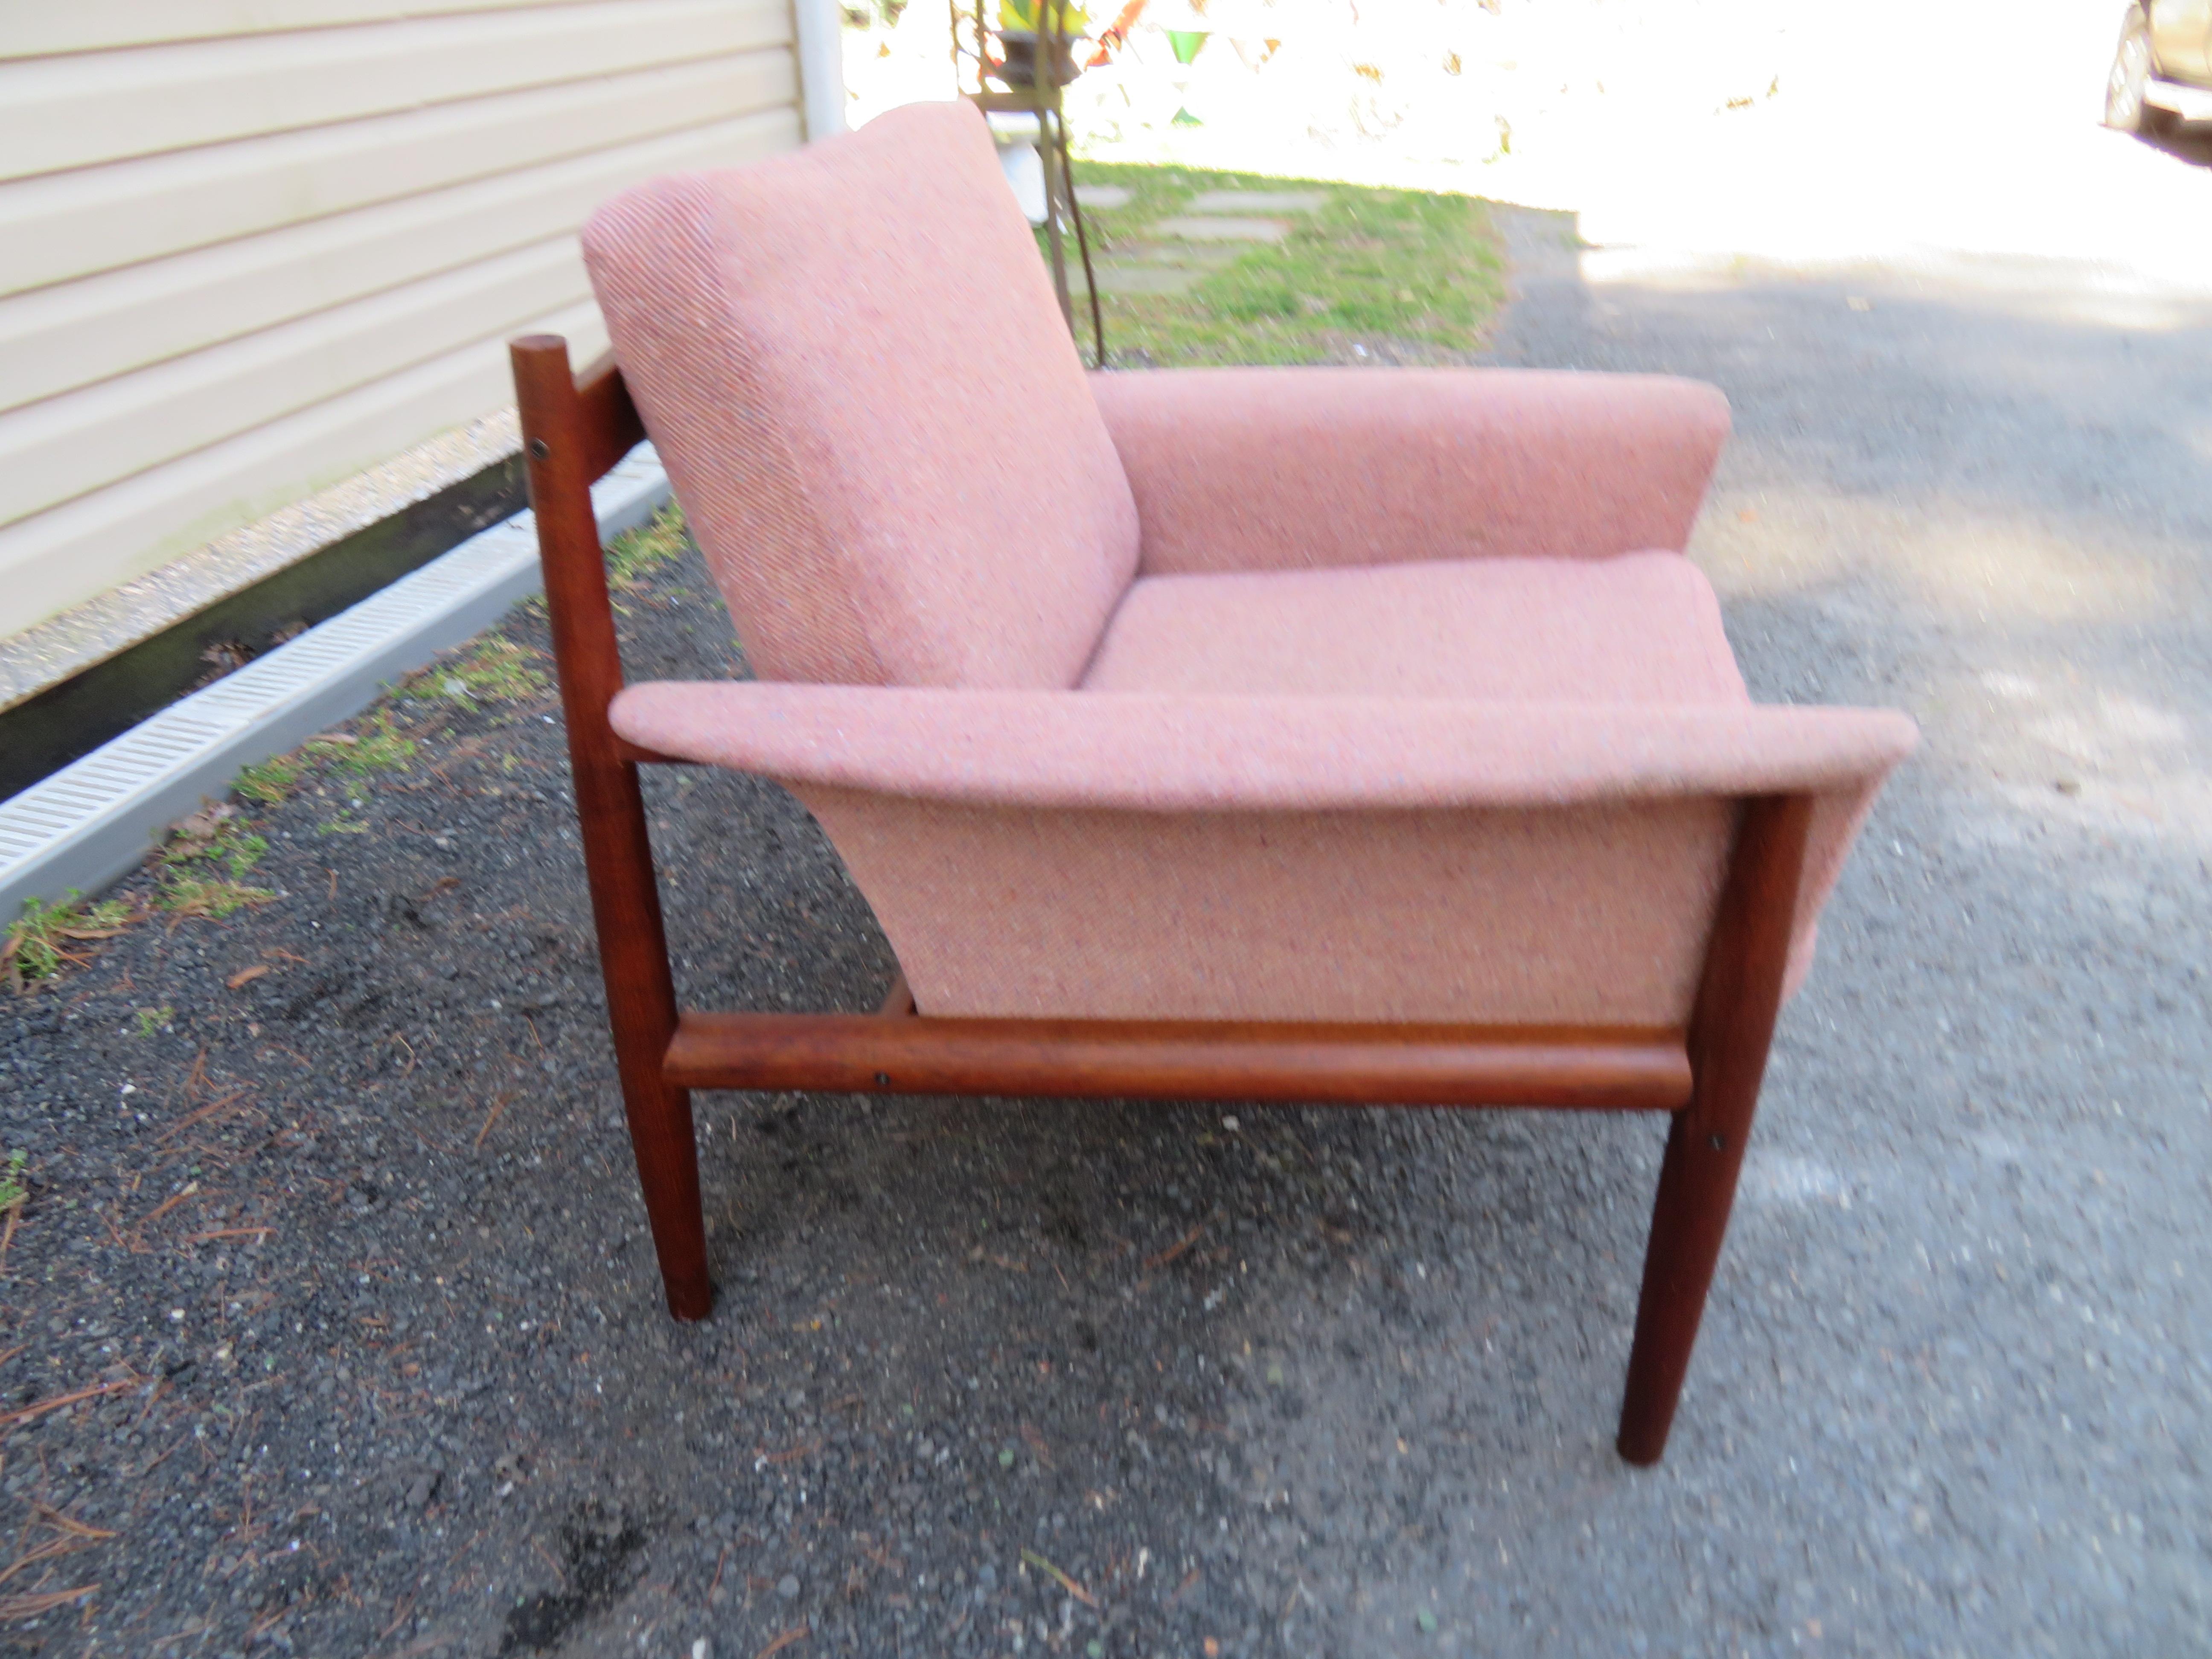 Outstanding Grete Jalk teak lounge chair. This chair retains its original mauve woven fabric in nice vintage condition-some light spots-cleaning recommended. Very usable as is but would be spectacular in something fresh. The teak frame has a